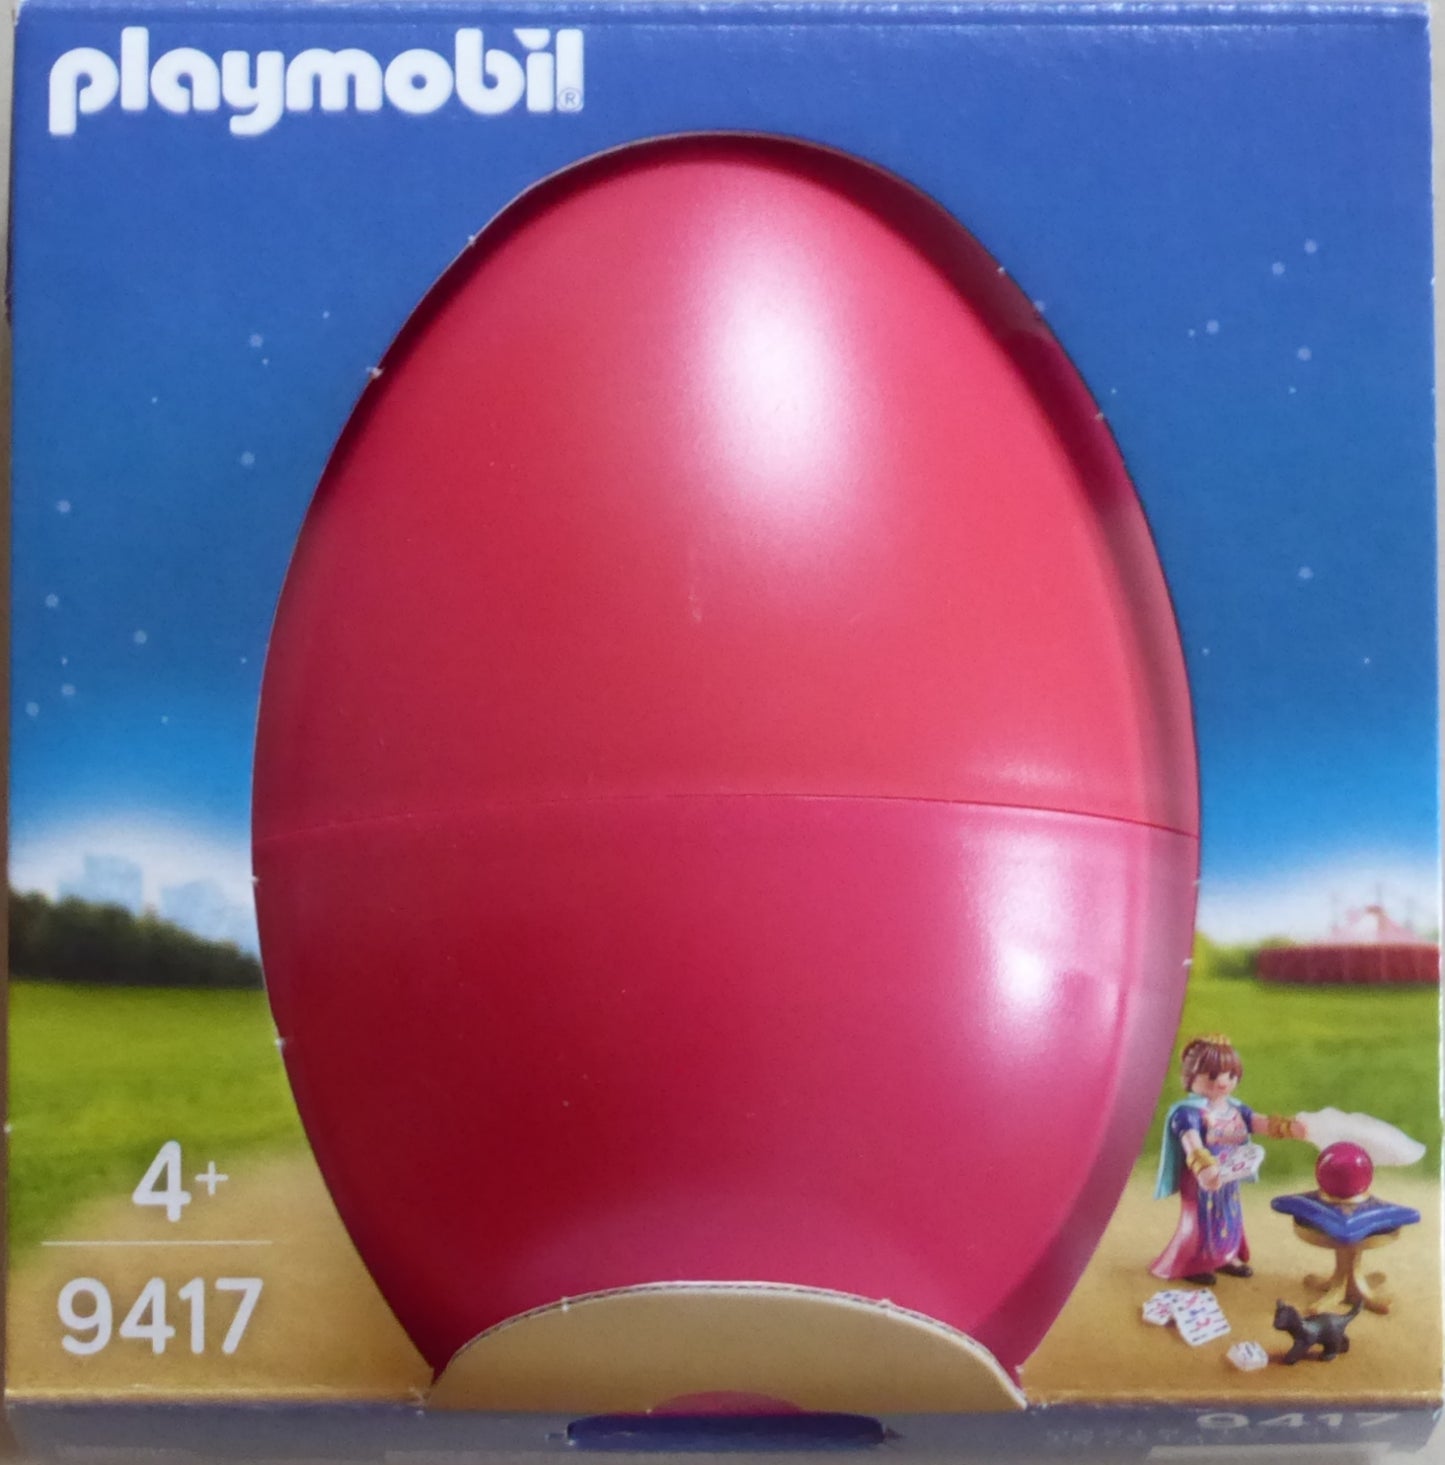 Playmobil 9417 Wahrsagerin